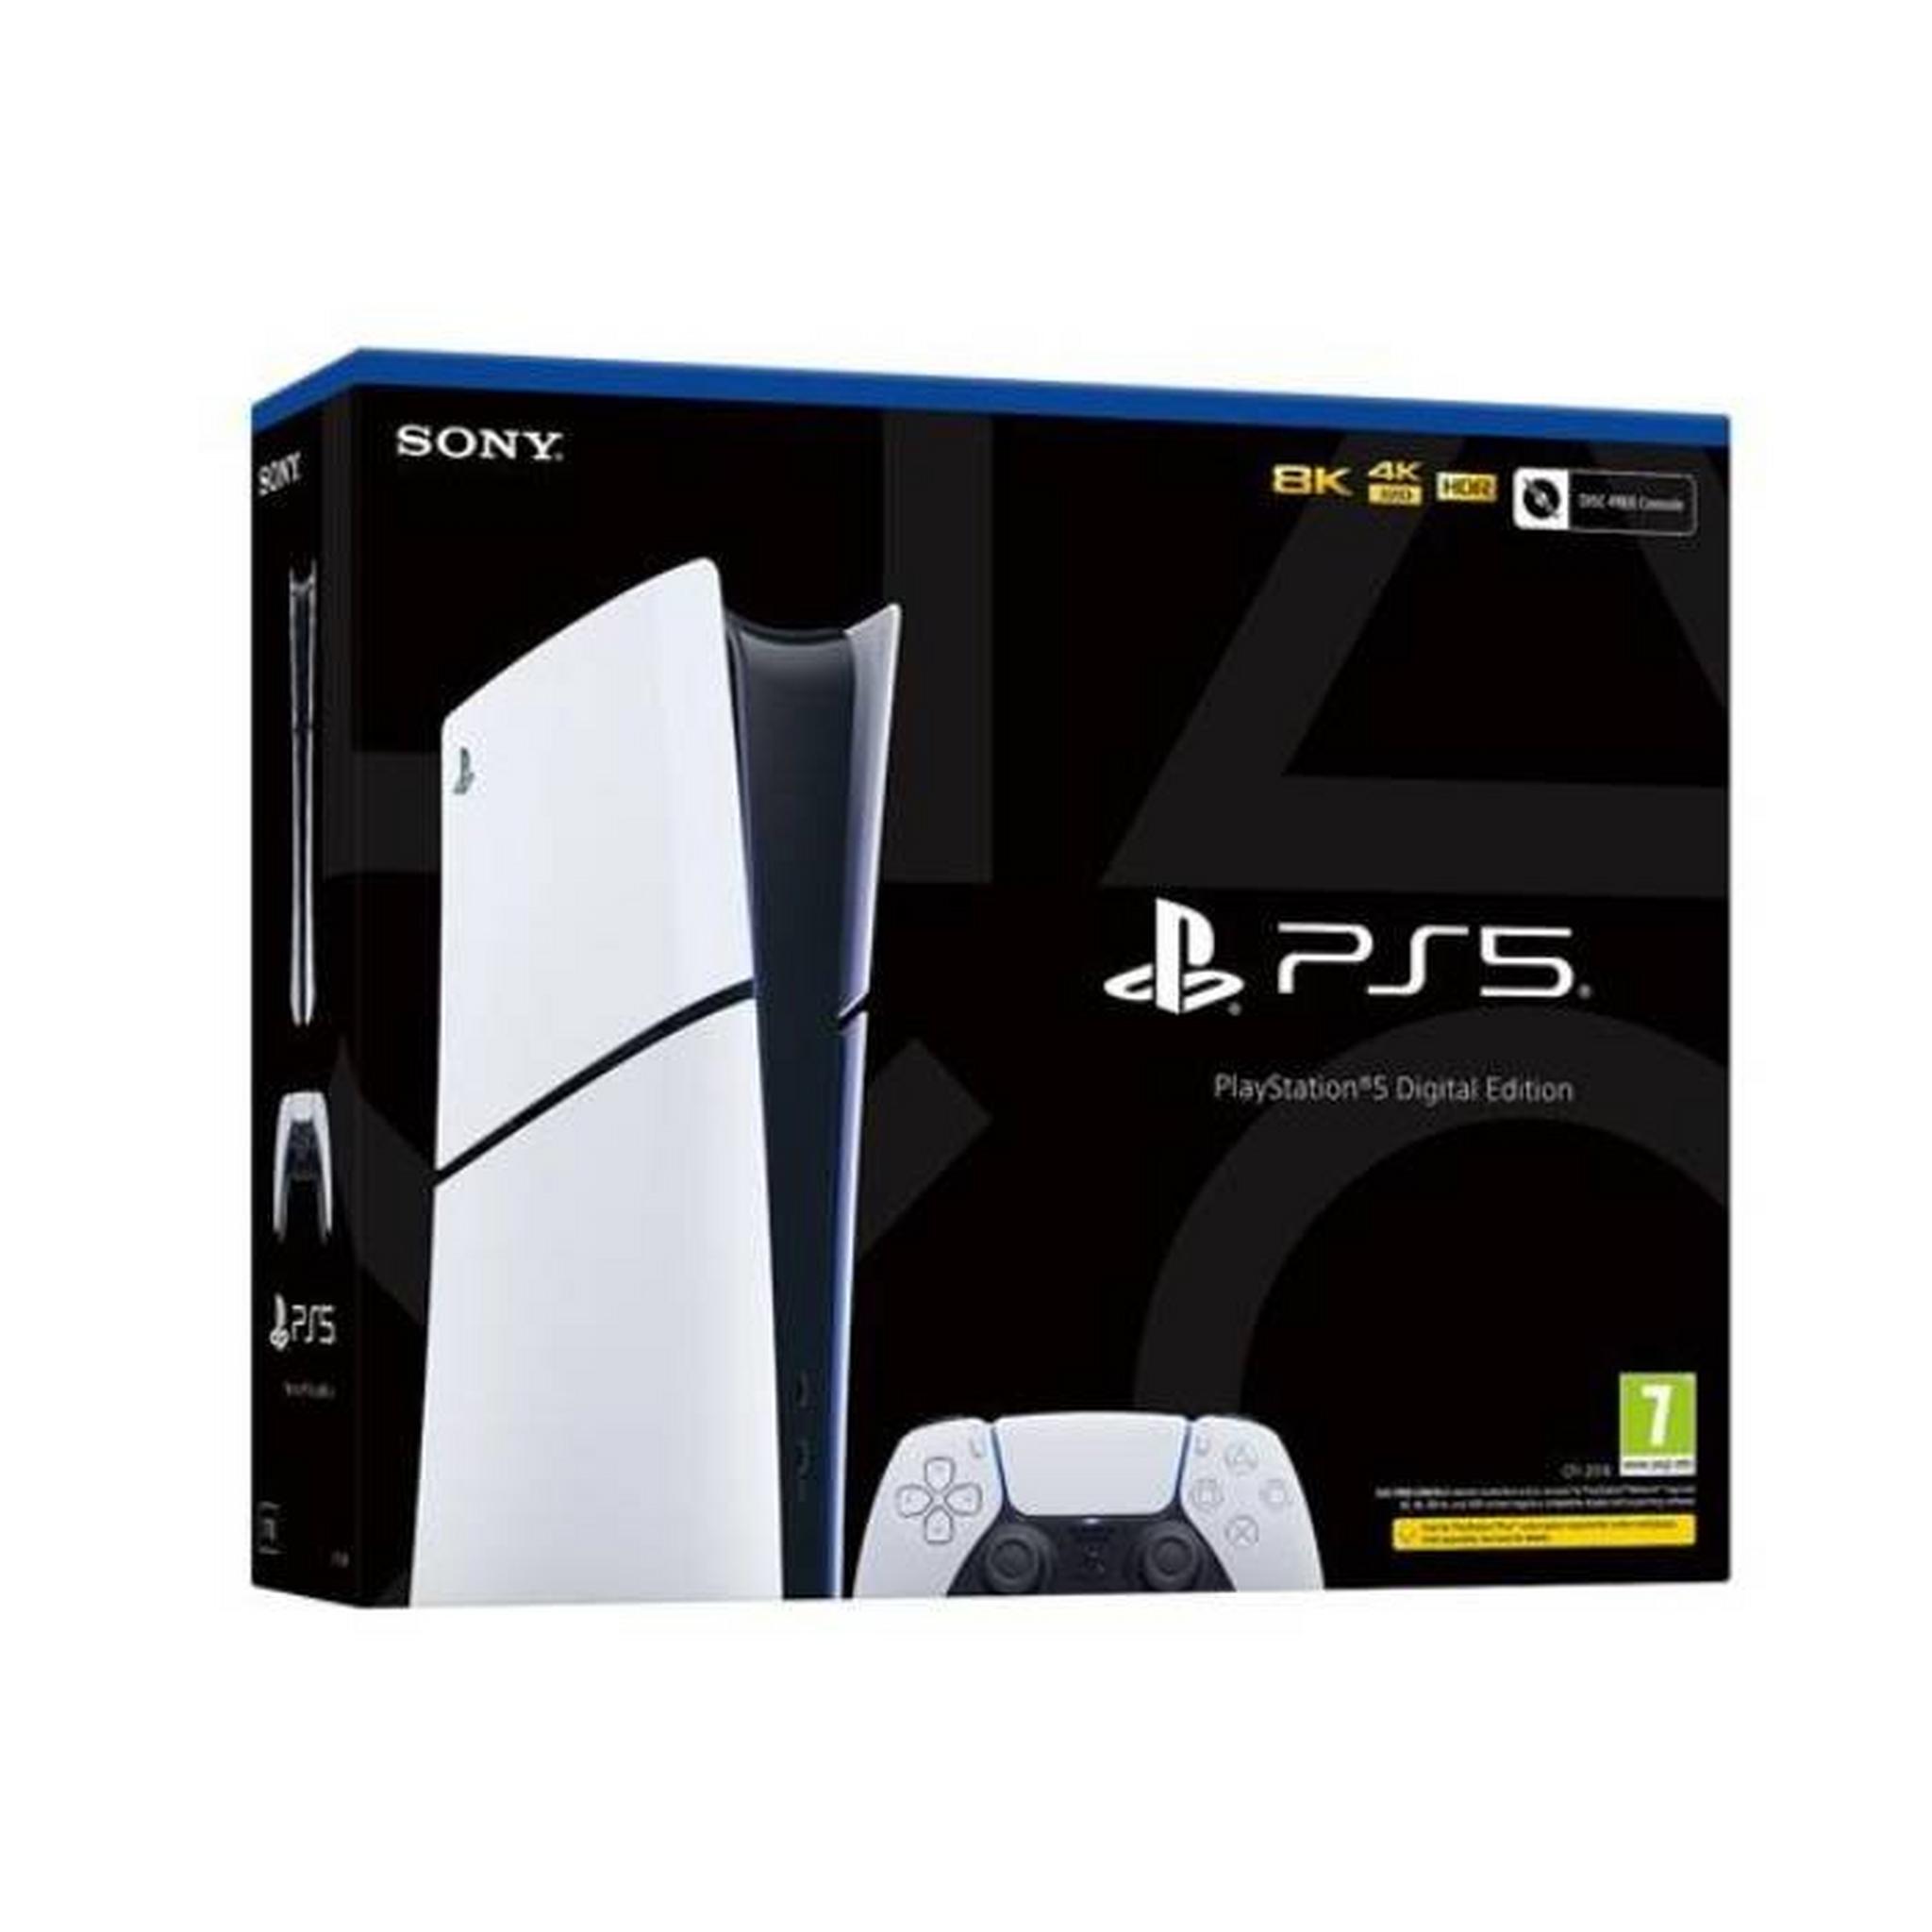 Sony PlayStation 5 Slim Digital Edition Console, 1TB SSD, PS5-DCHASSIS-DIGI – White